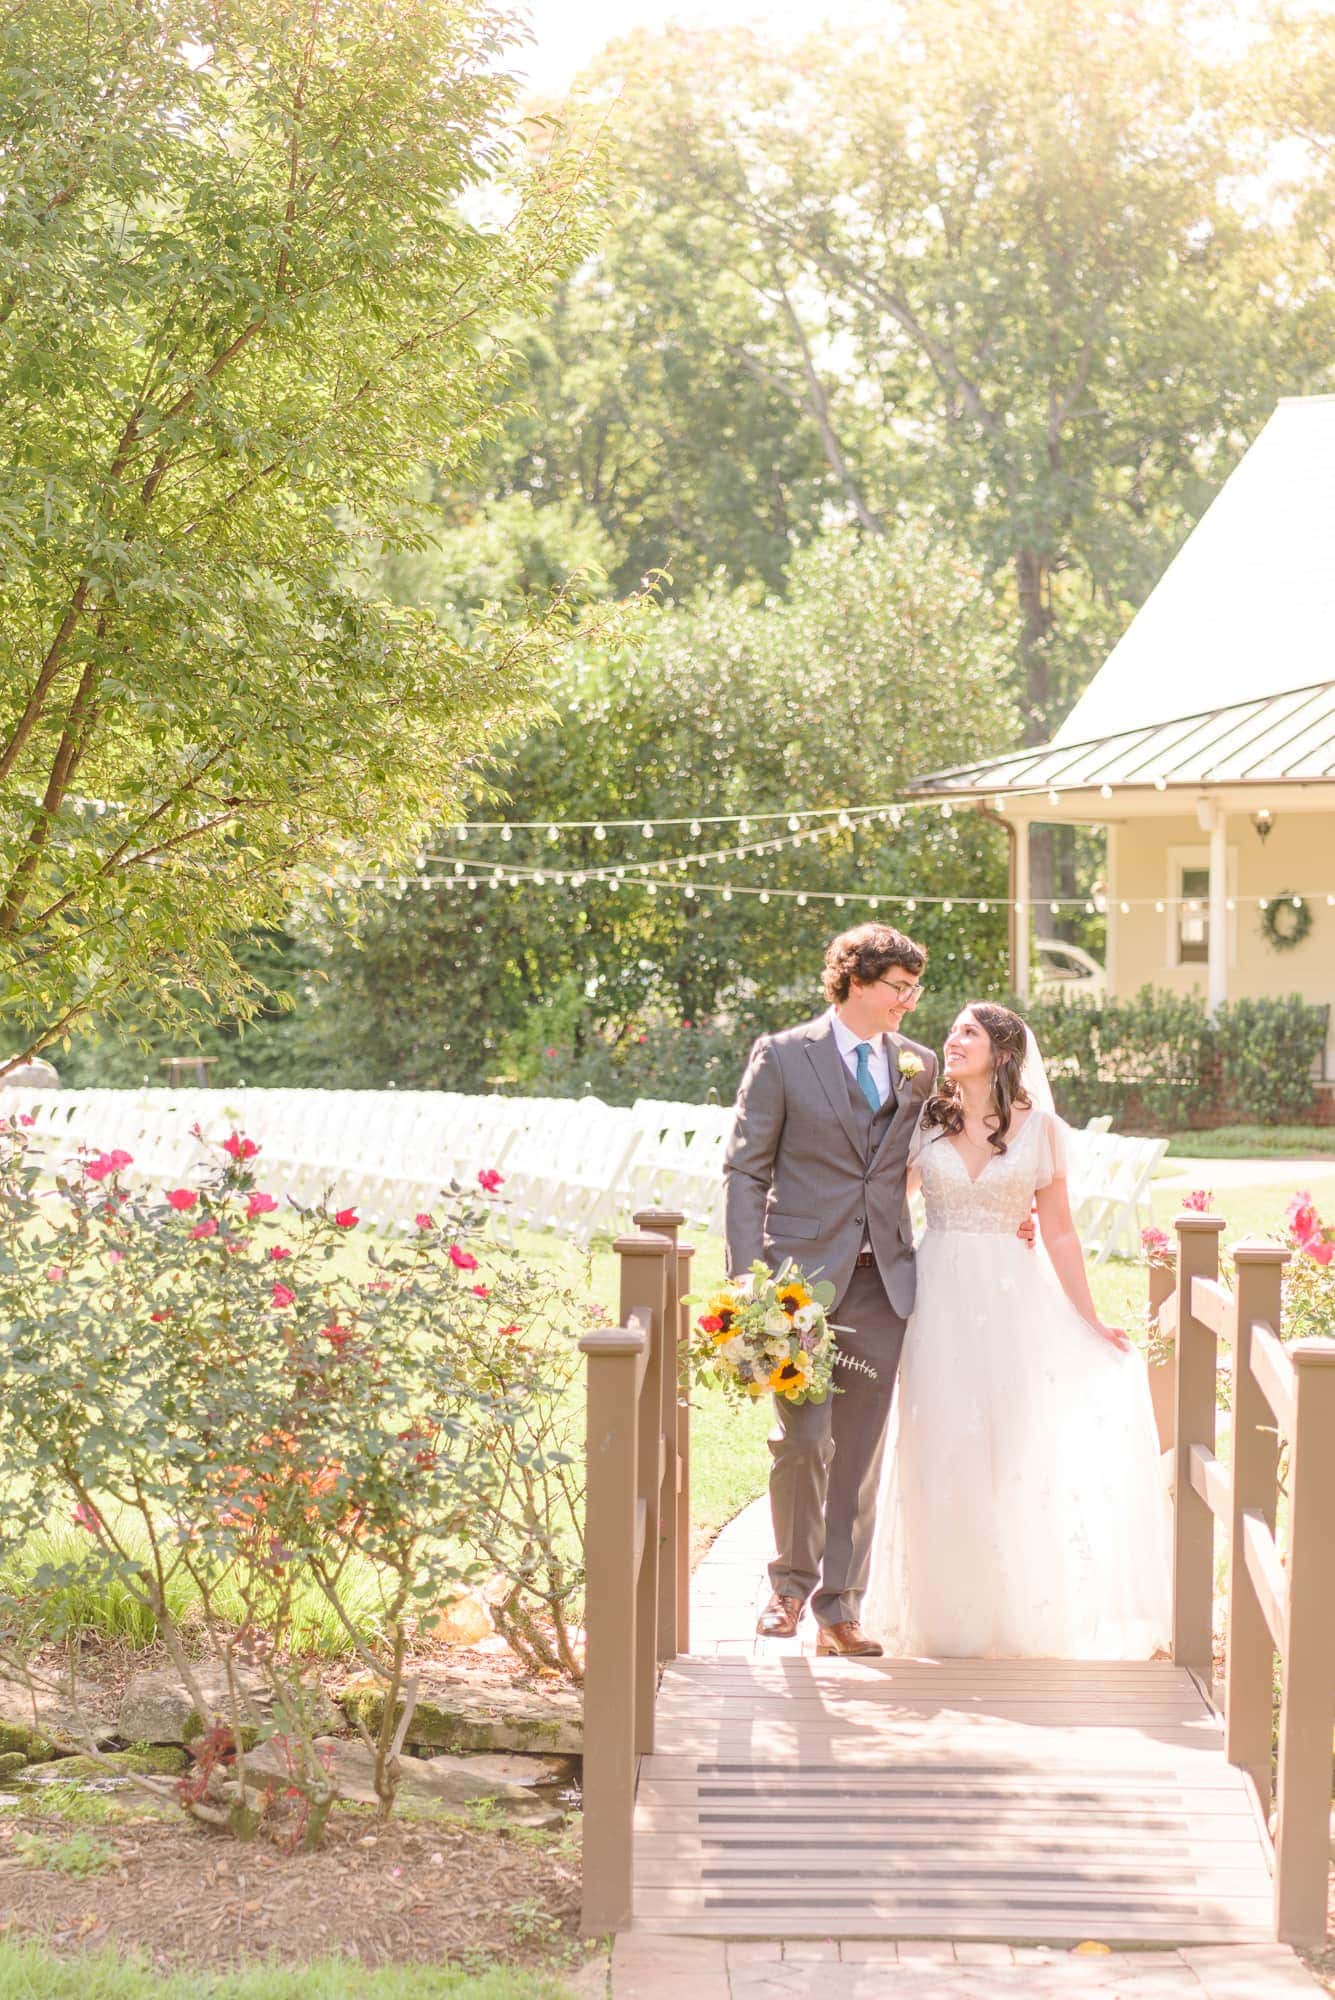 Natalie and Tommy walk together across the small bridge outside of Charlotte's mansion venue, Alexander Homestead.